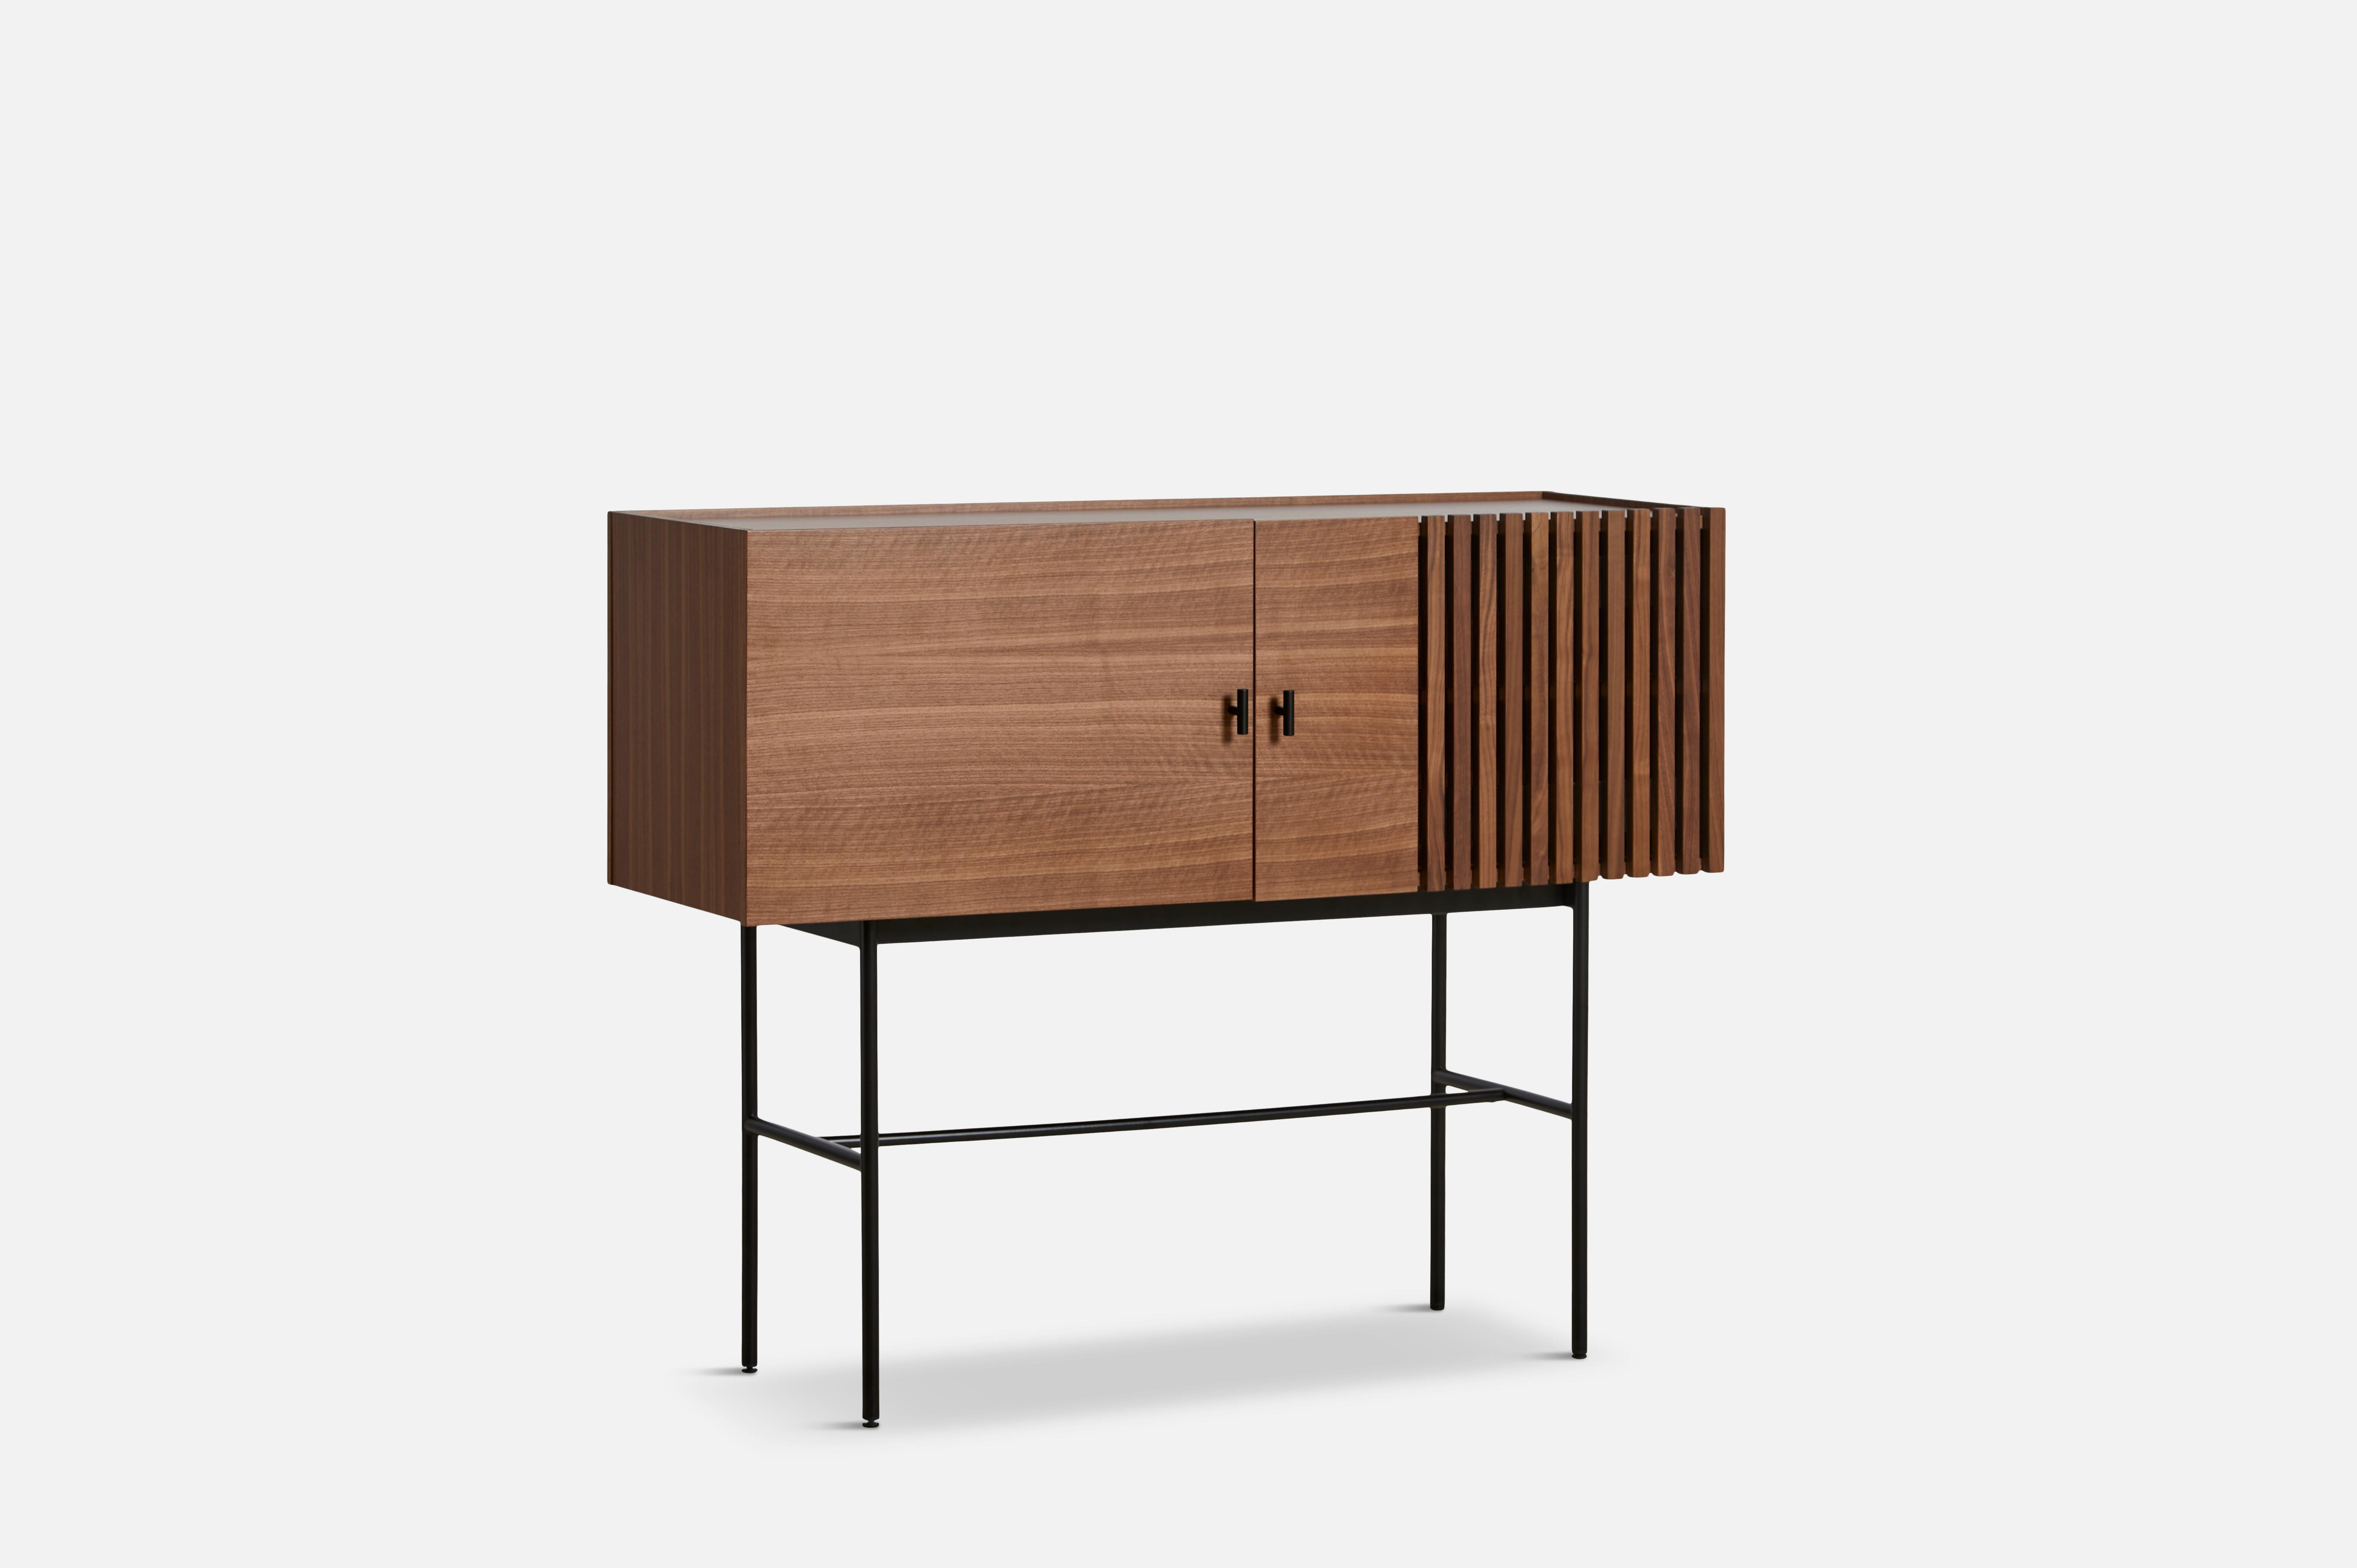 Walnut array sideboard 120 by Says Who.
Materials: Walnut, metal
Dimensions: D 44 x W 120 x H 97 cm
Also available in different colours and materials.

The founders, Mia and Torben Koed, decided to put their 30 years of experience into a new